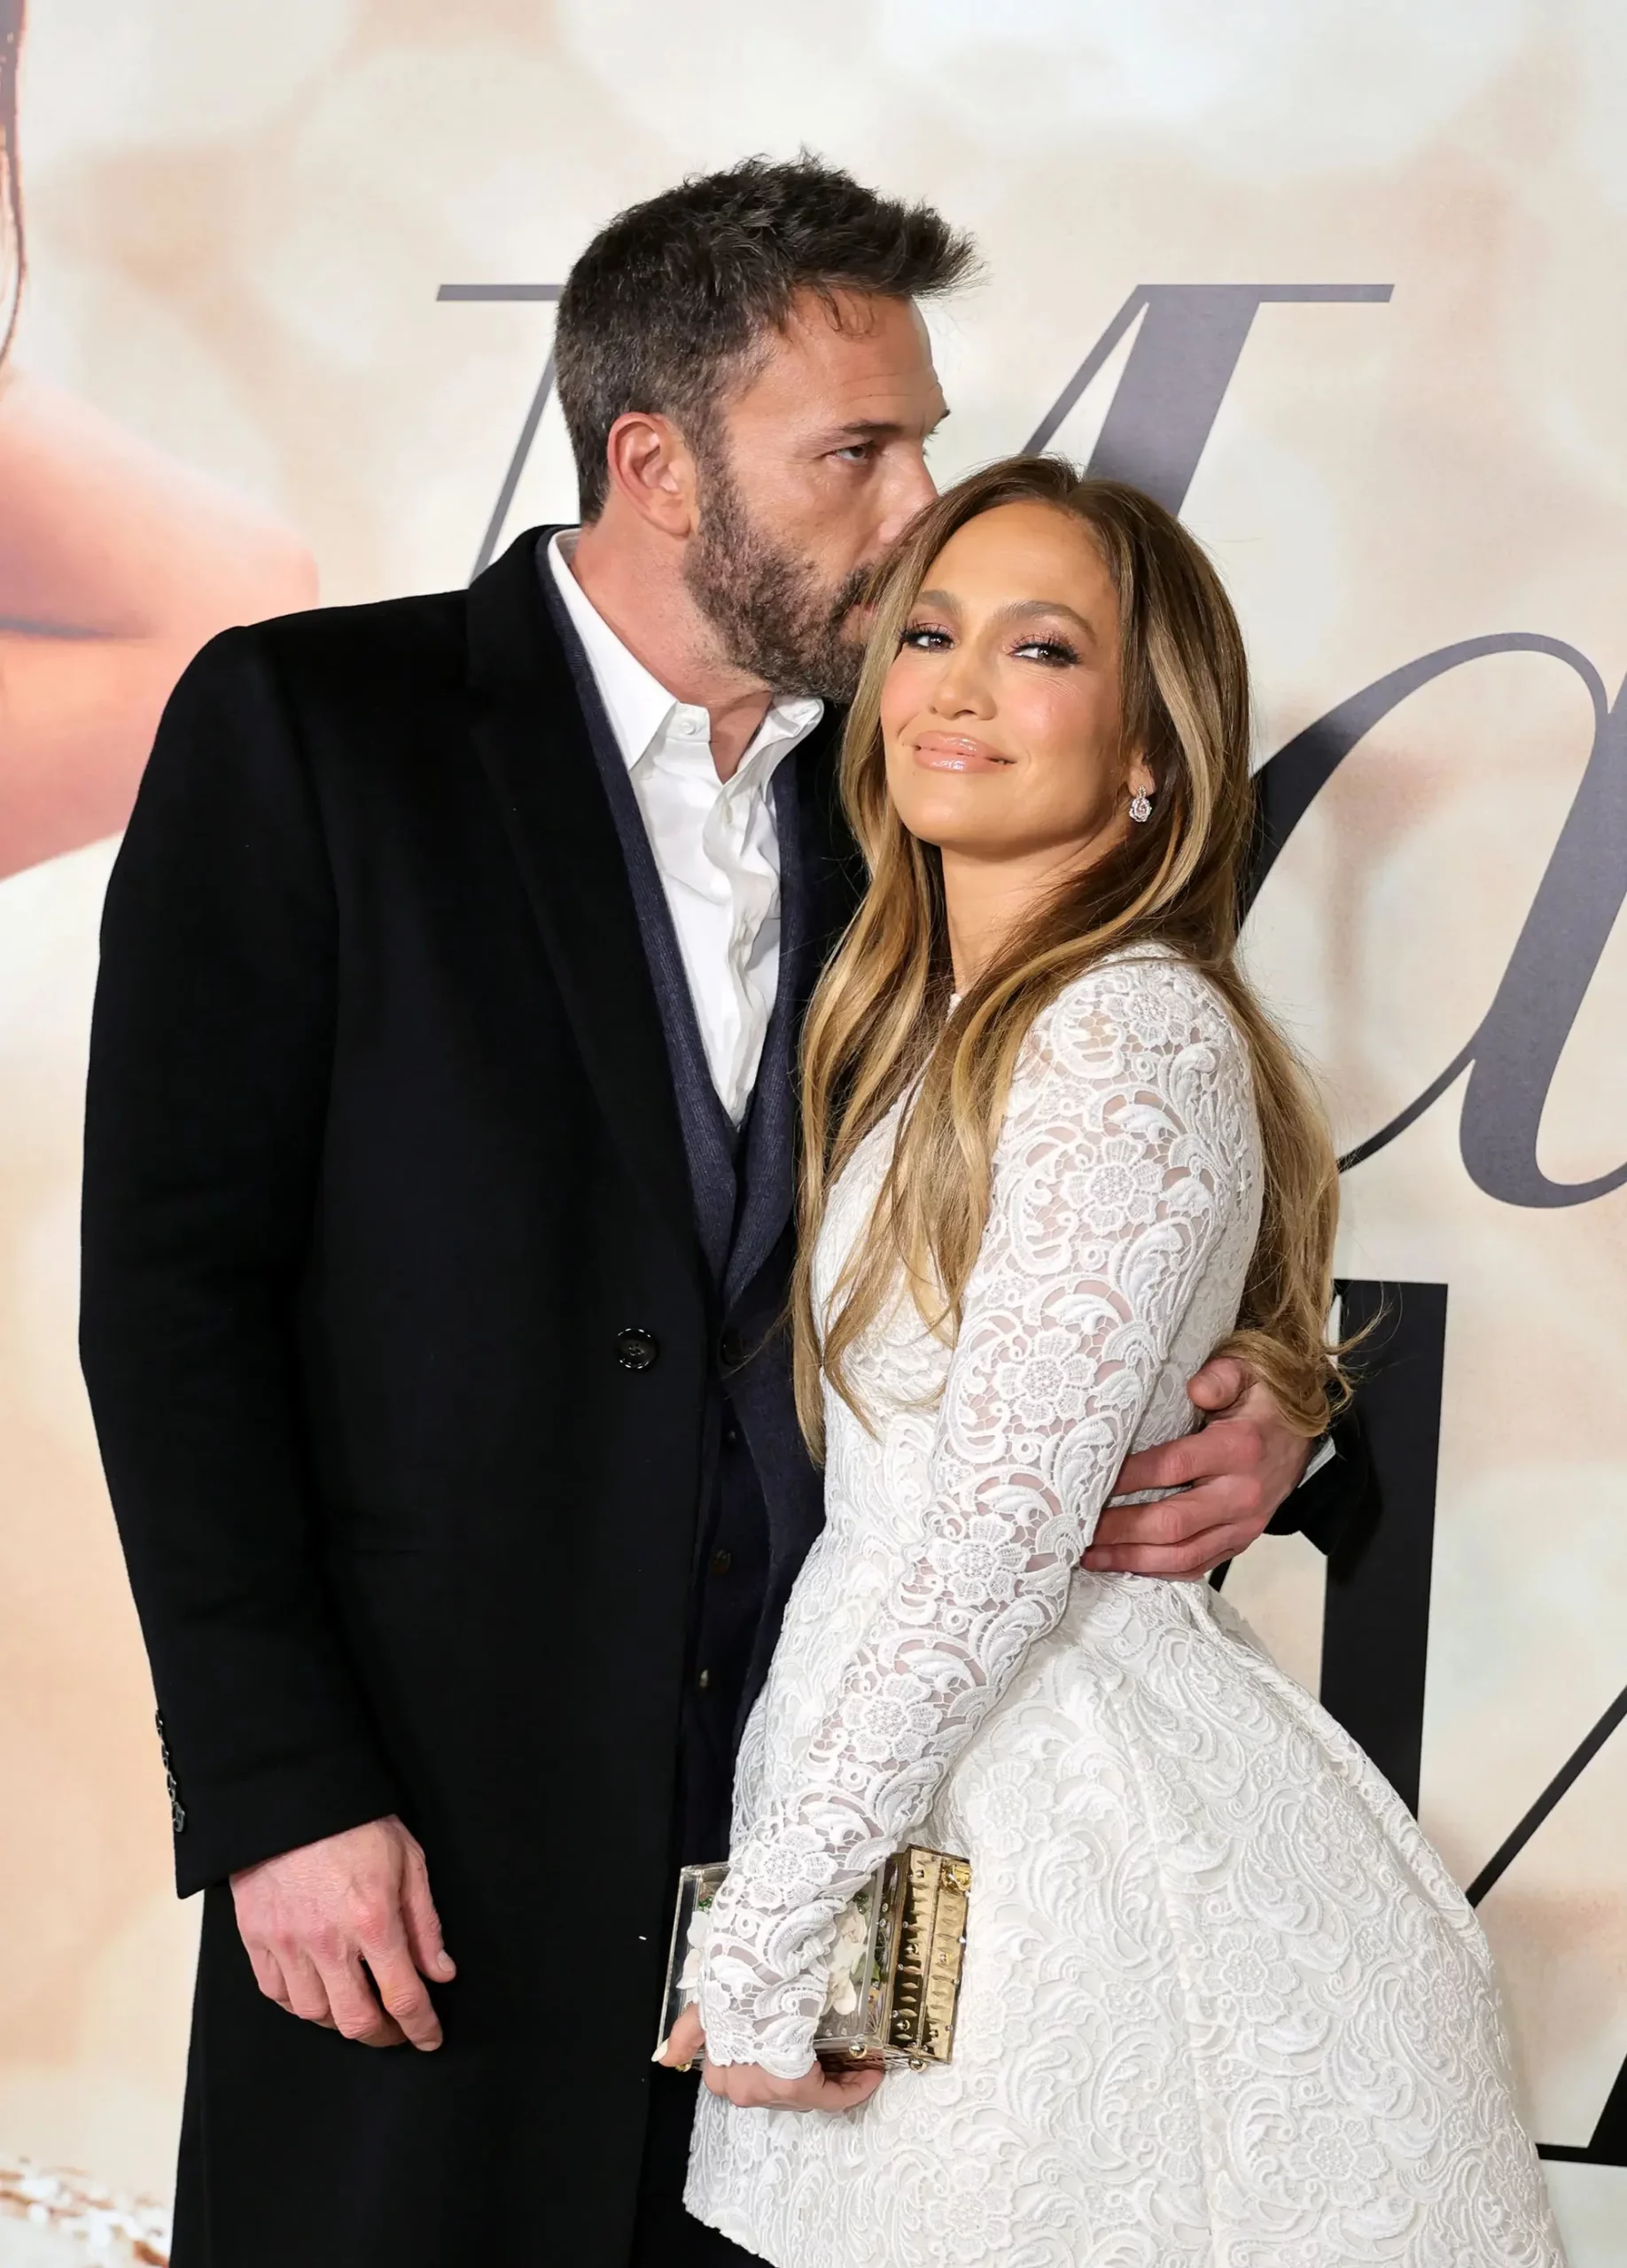 Ben Affleck and Jennifer Lopez will have their wedding celebration this weekend | FMV6